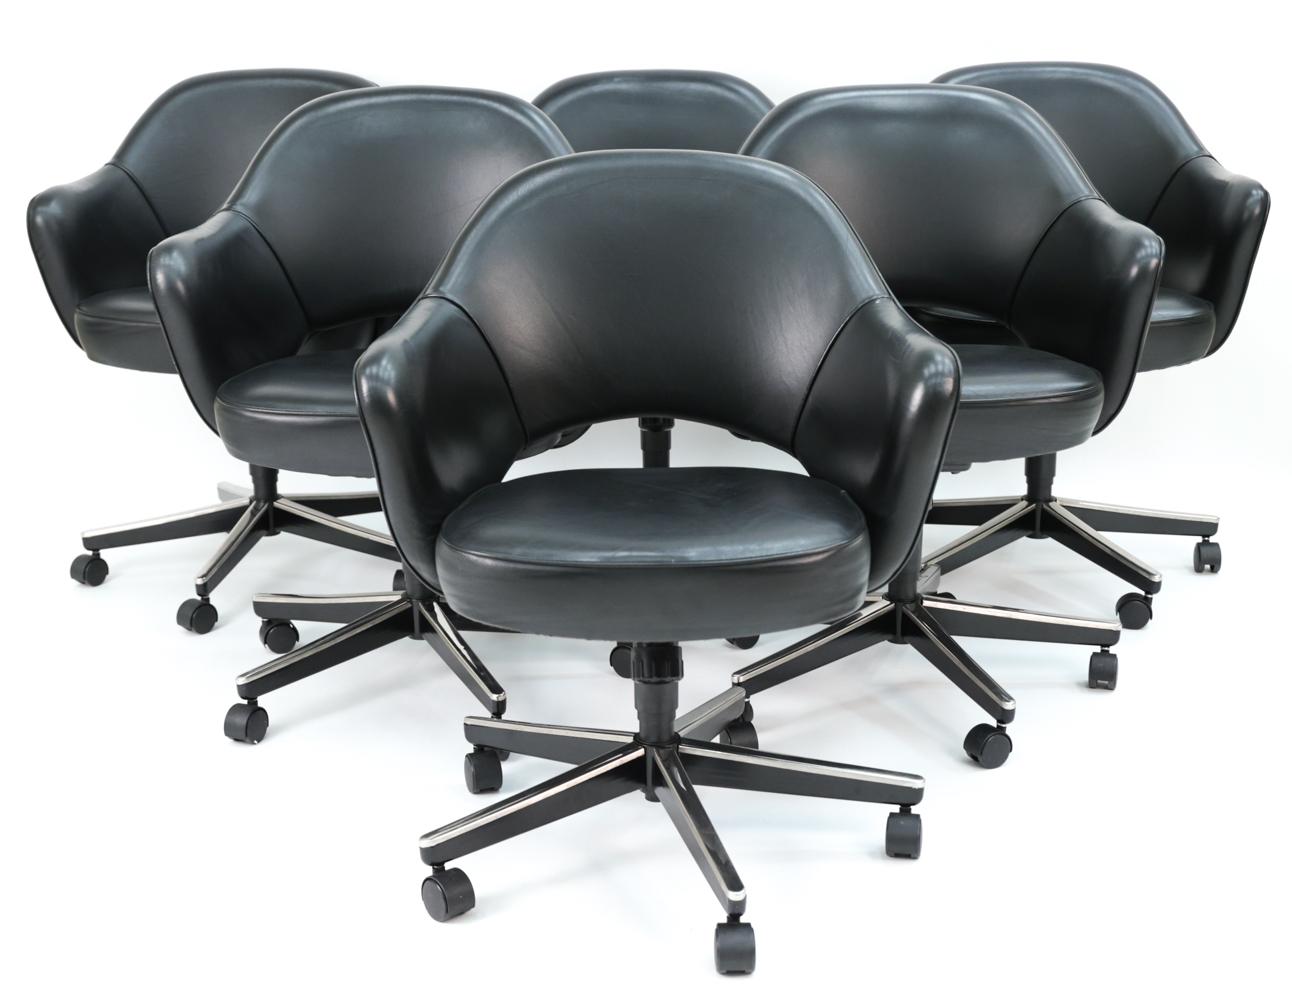 Set of (6) contemporary Eero Saarinen executive armchairs, with rolling swivel bases and black Volo leather upholstery, circa 2004.
Featured in nearly all Florence Knoll-designed interiors, the Saarinen executive chair has remained one of Knoll's